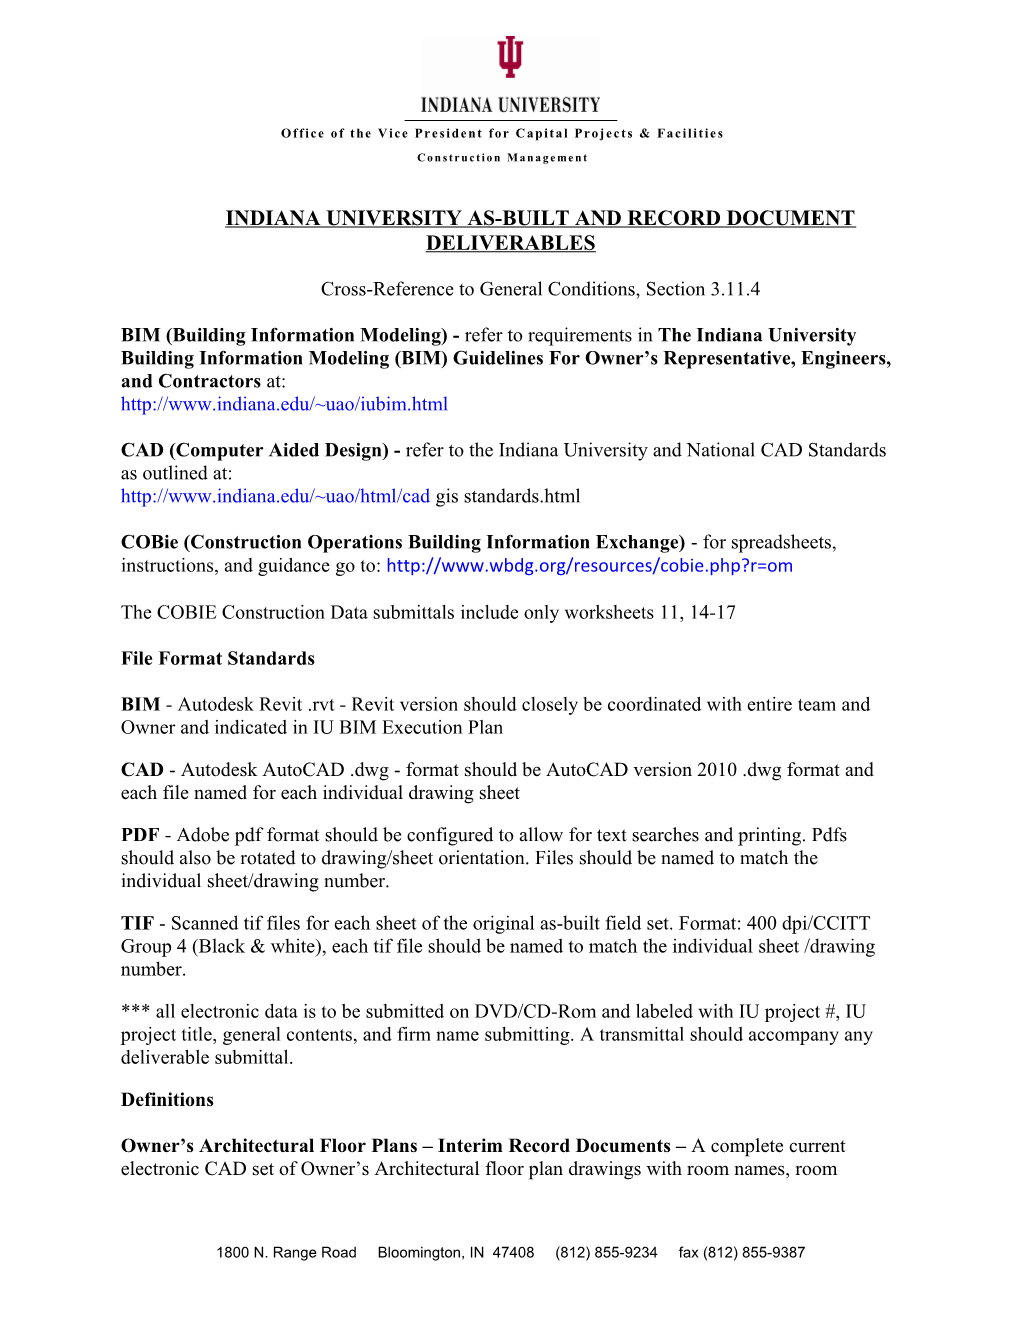 Indiana University As-Built and Record Document Deliverables